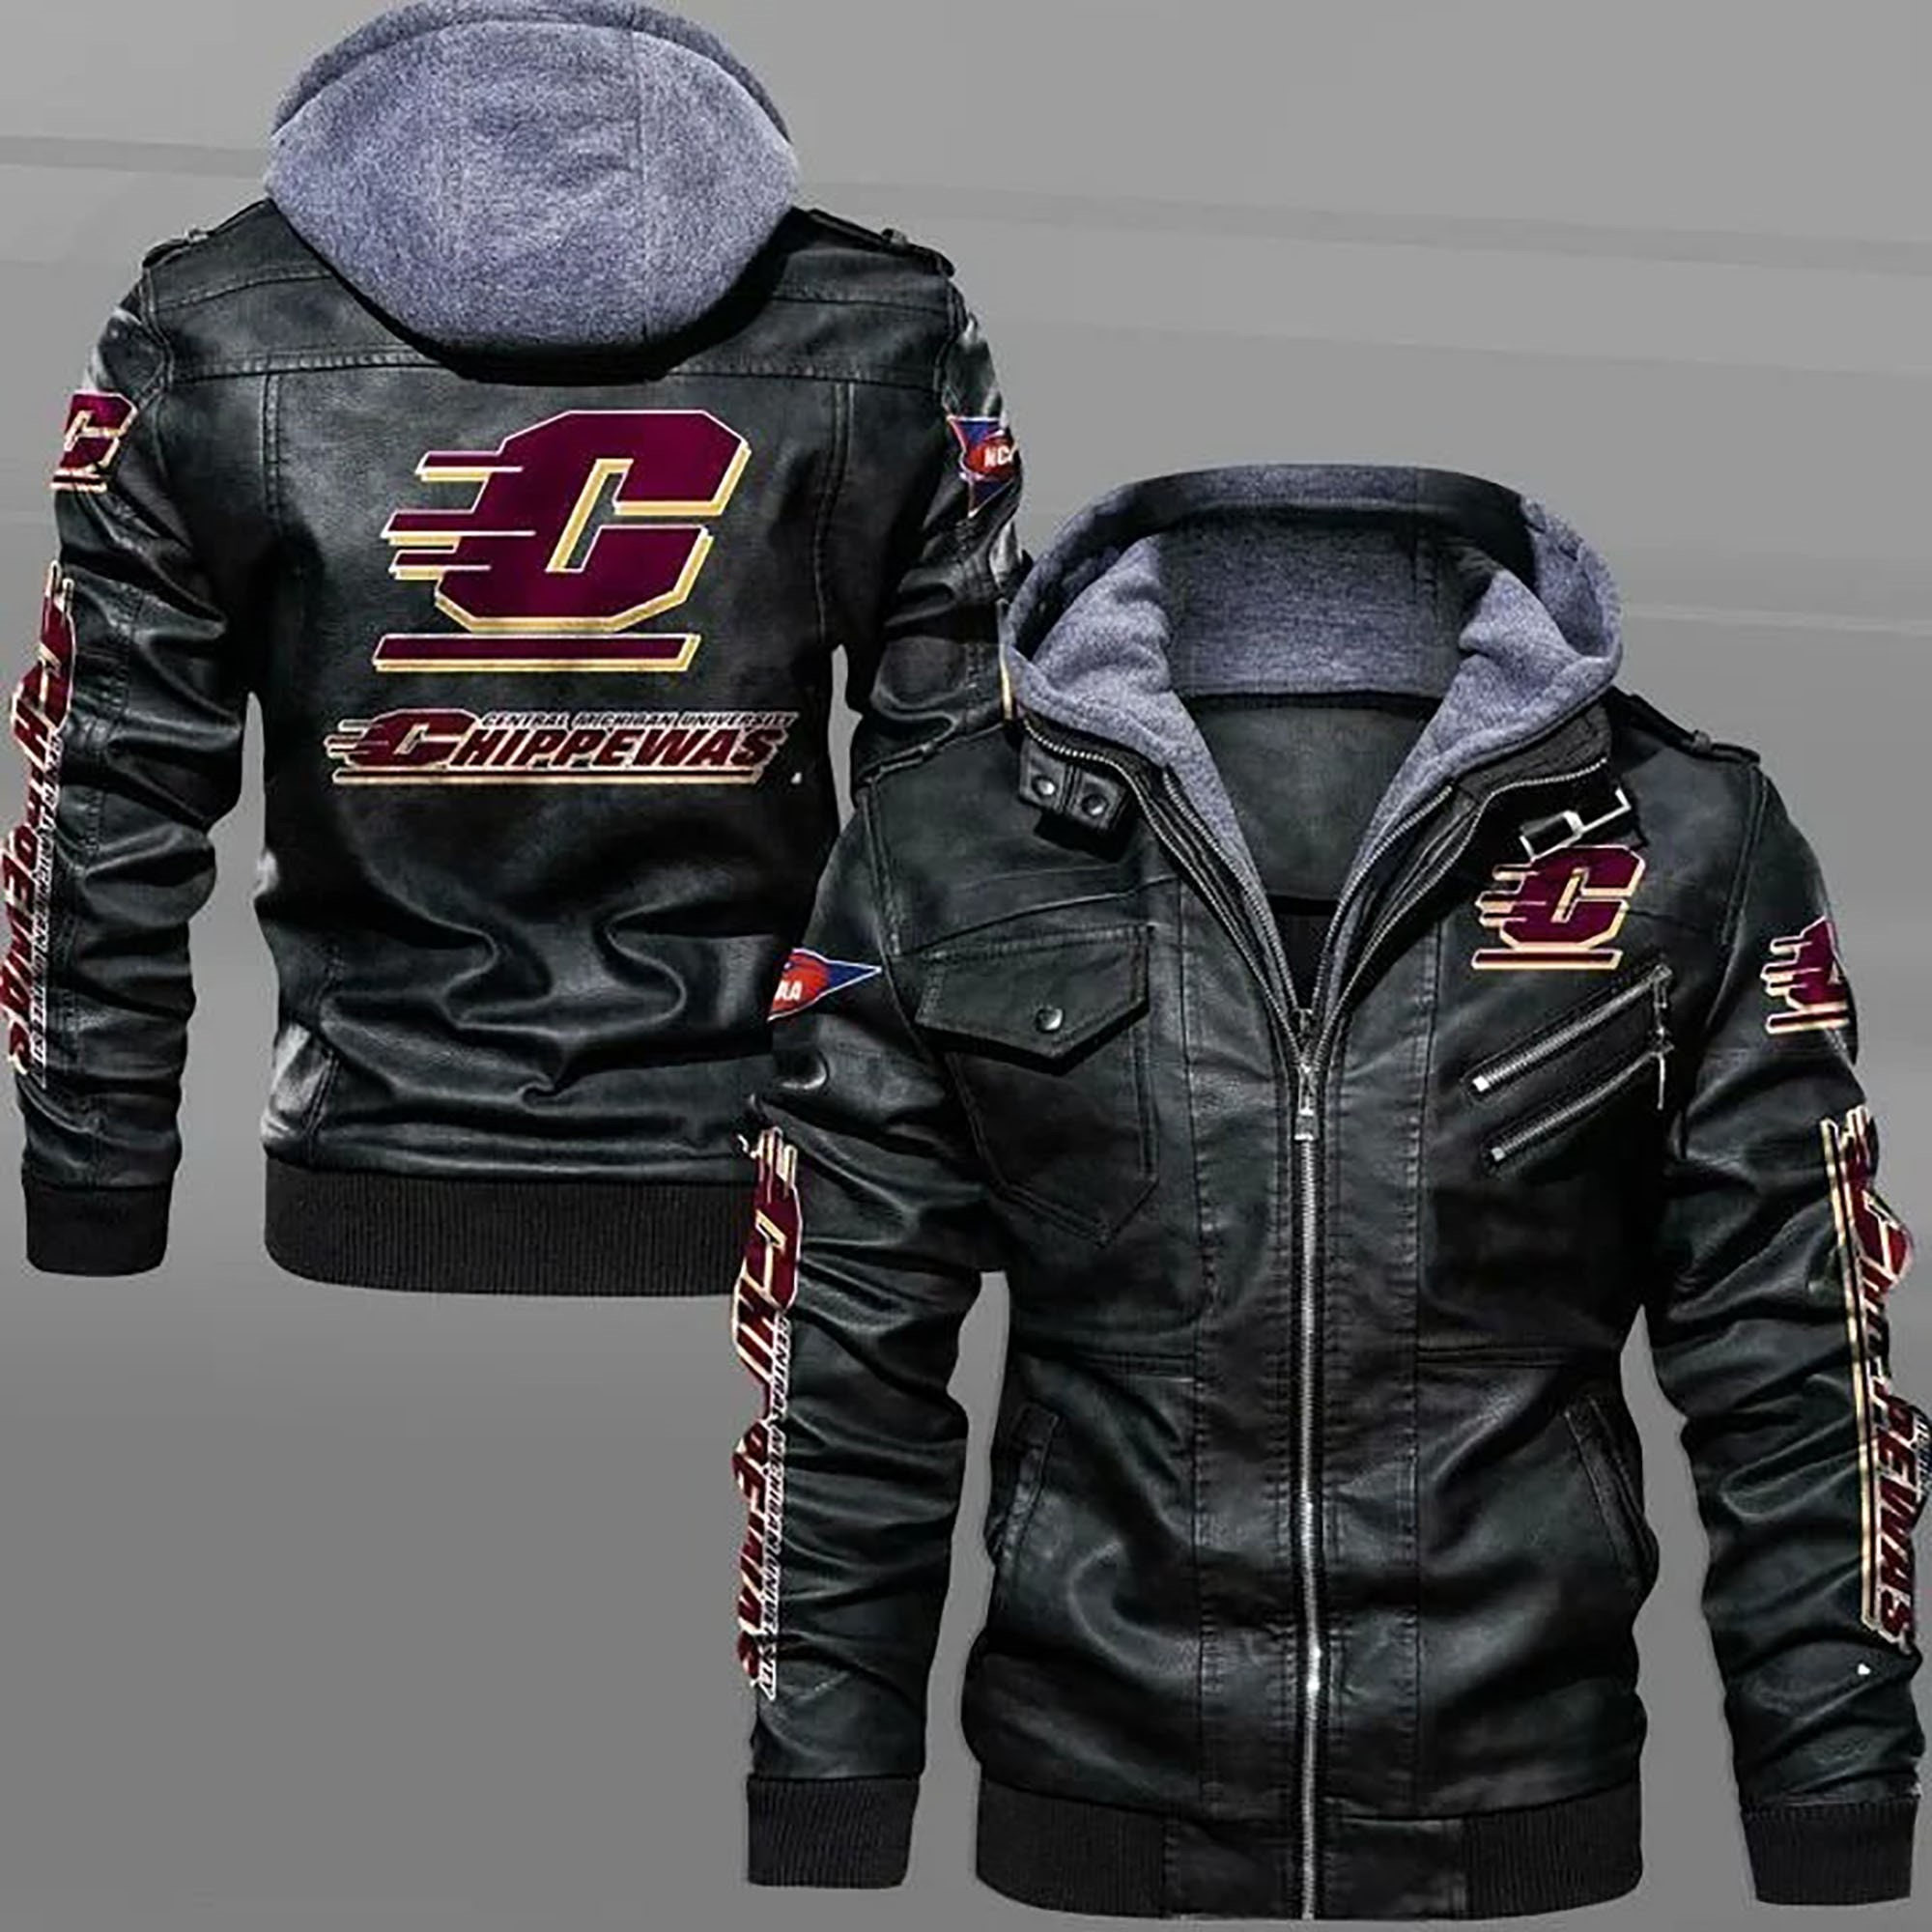 These Amazing Leather Jacket will add to the appeal of your outfit 103